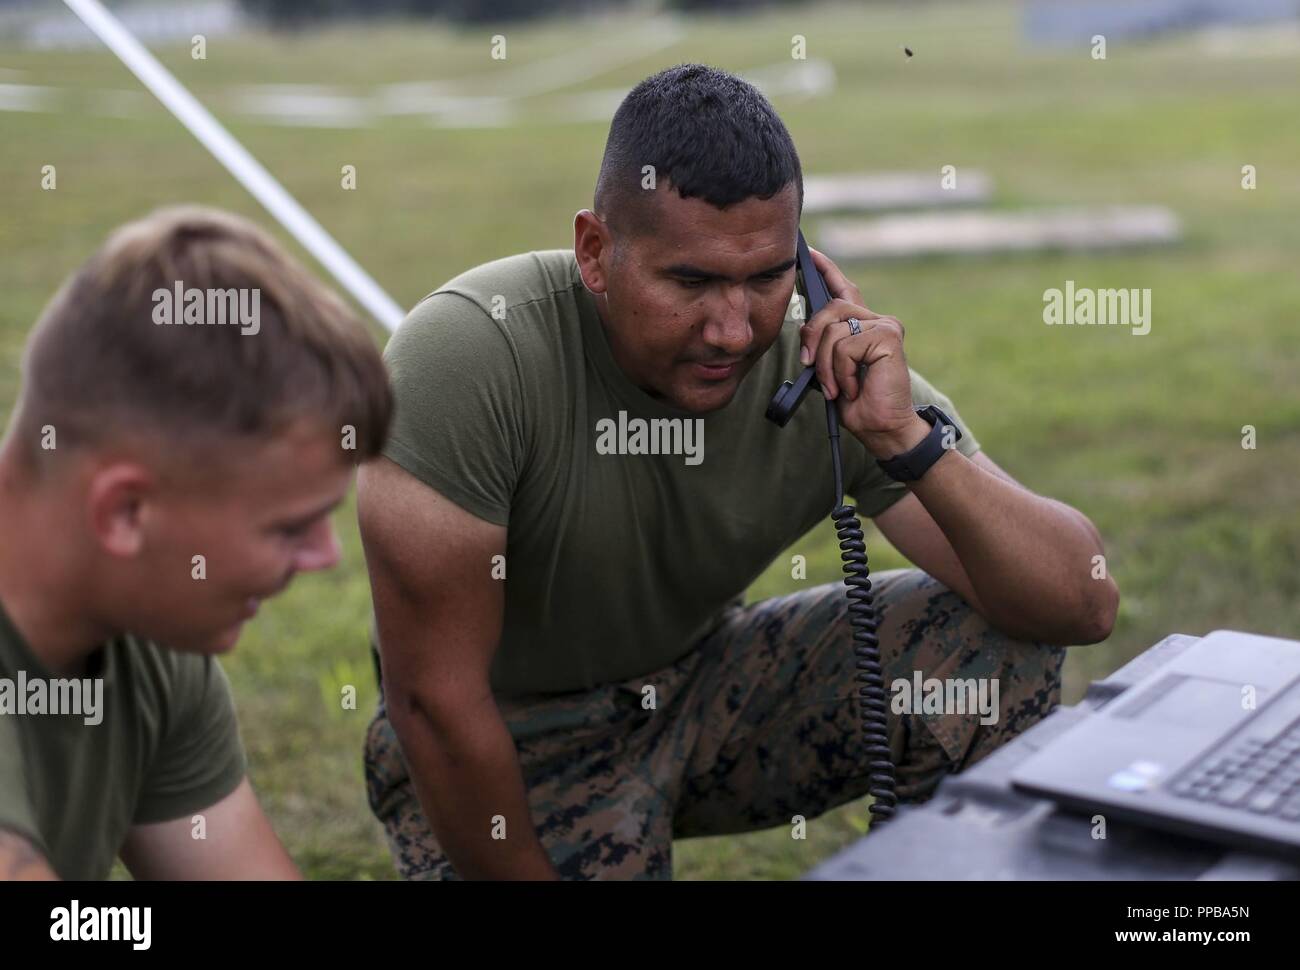 Marines with Marine Aircraft Group (MAG) 13 communicate with Marines at Marine Corps Air Station Miramar utilizing high frequency communication equipment during Exercise Northern Lightning at Volk Field Counterland Training Center, Camp Douglas, Wis. Aug. 16. Exercise Northern Lightning 2018 allows the Air Force, Marine Corps and Navy to strengthen interoperability between services and gives the different branches a greater understanding of aviation capabilities within a joint fighting force. Stock Photo